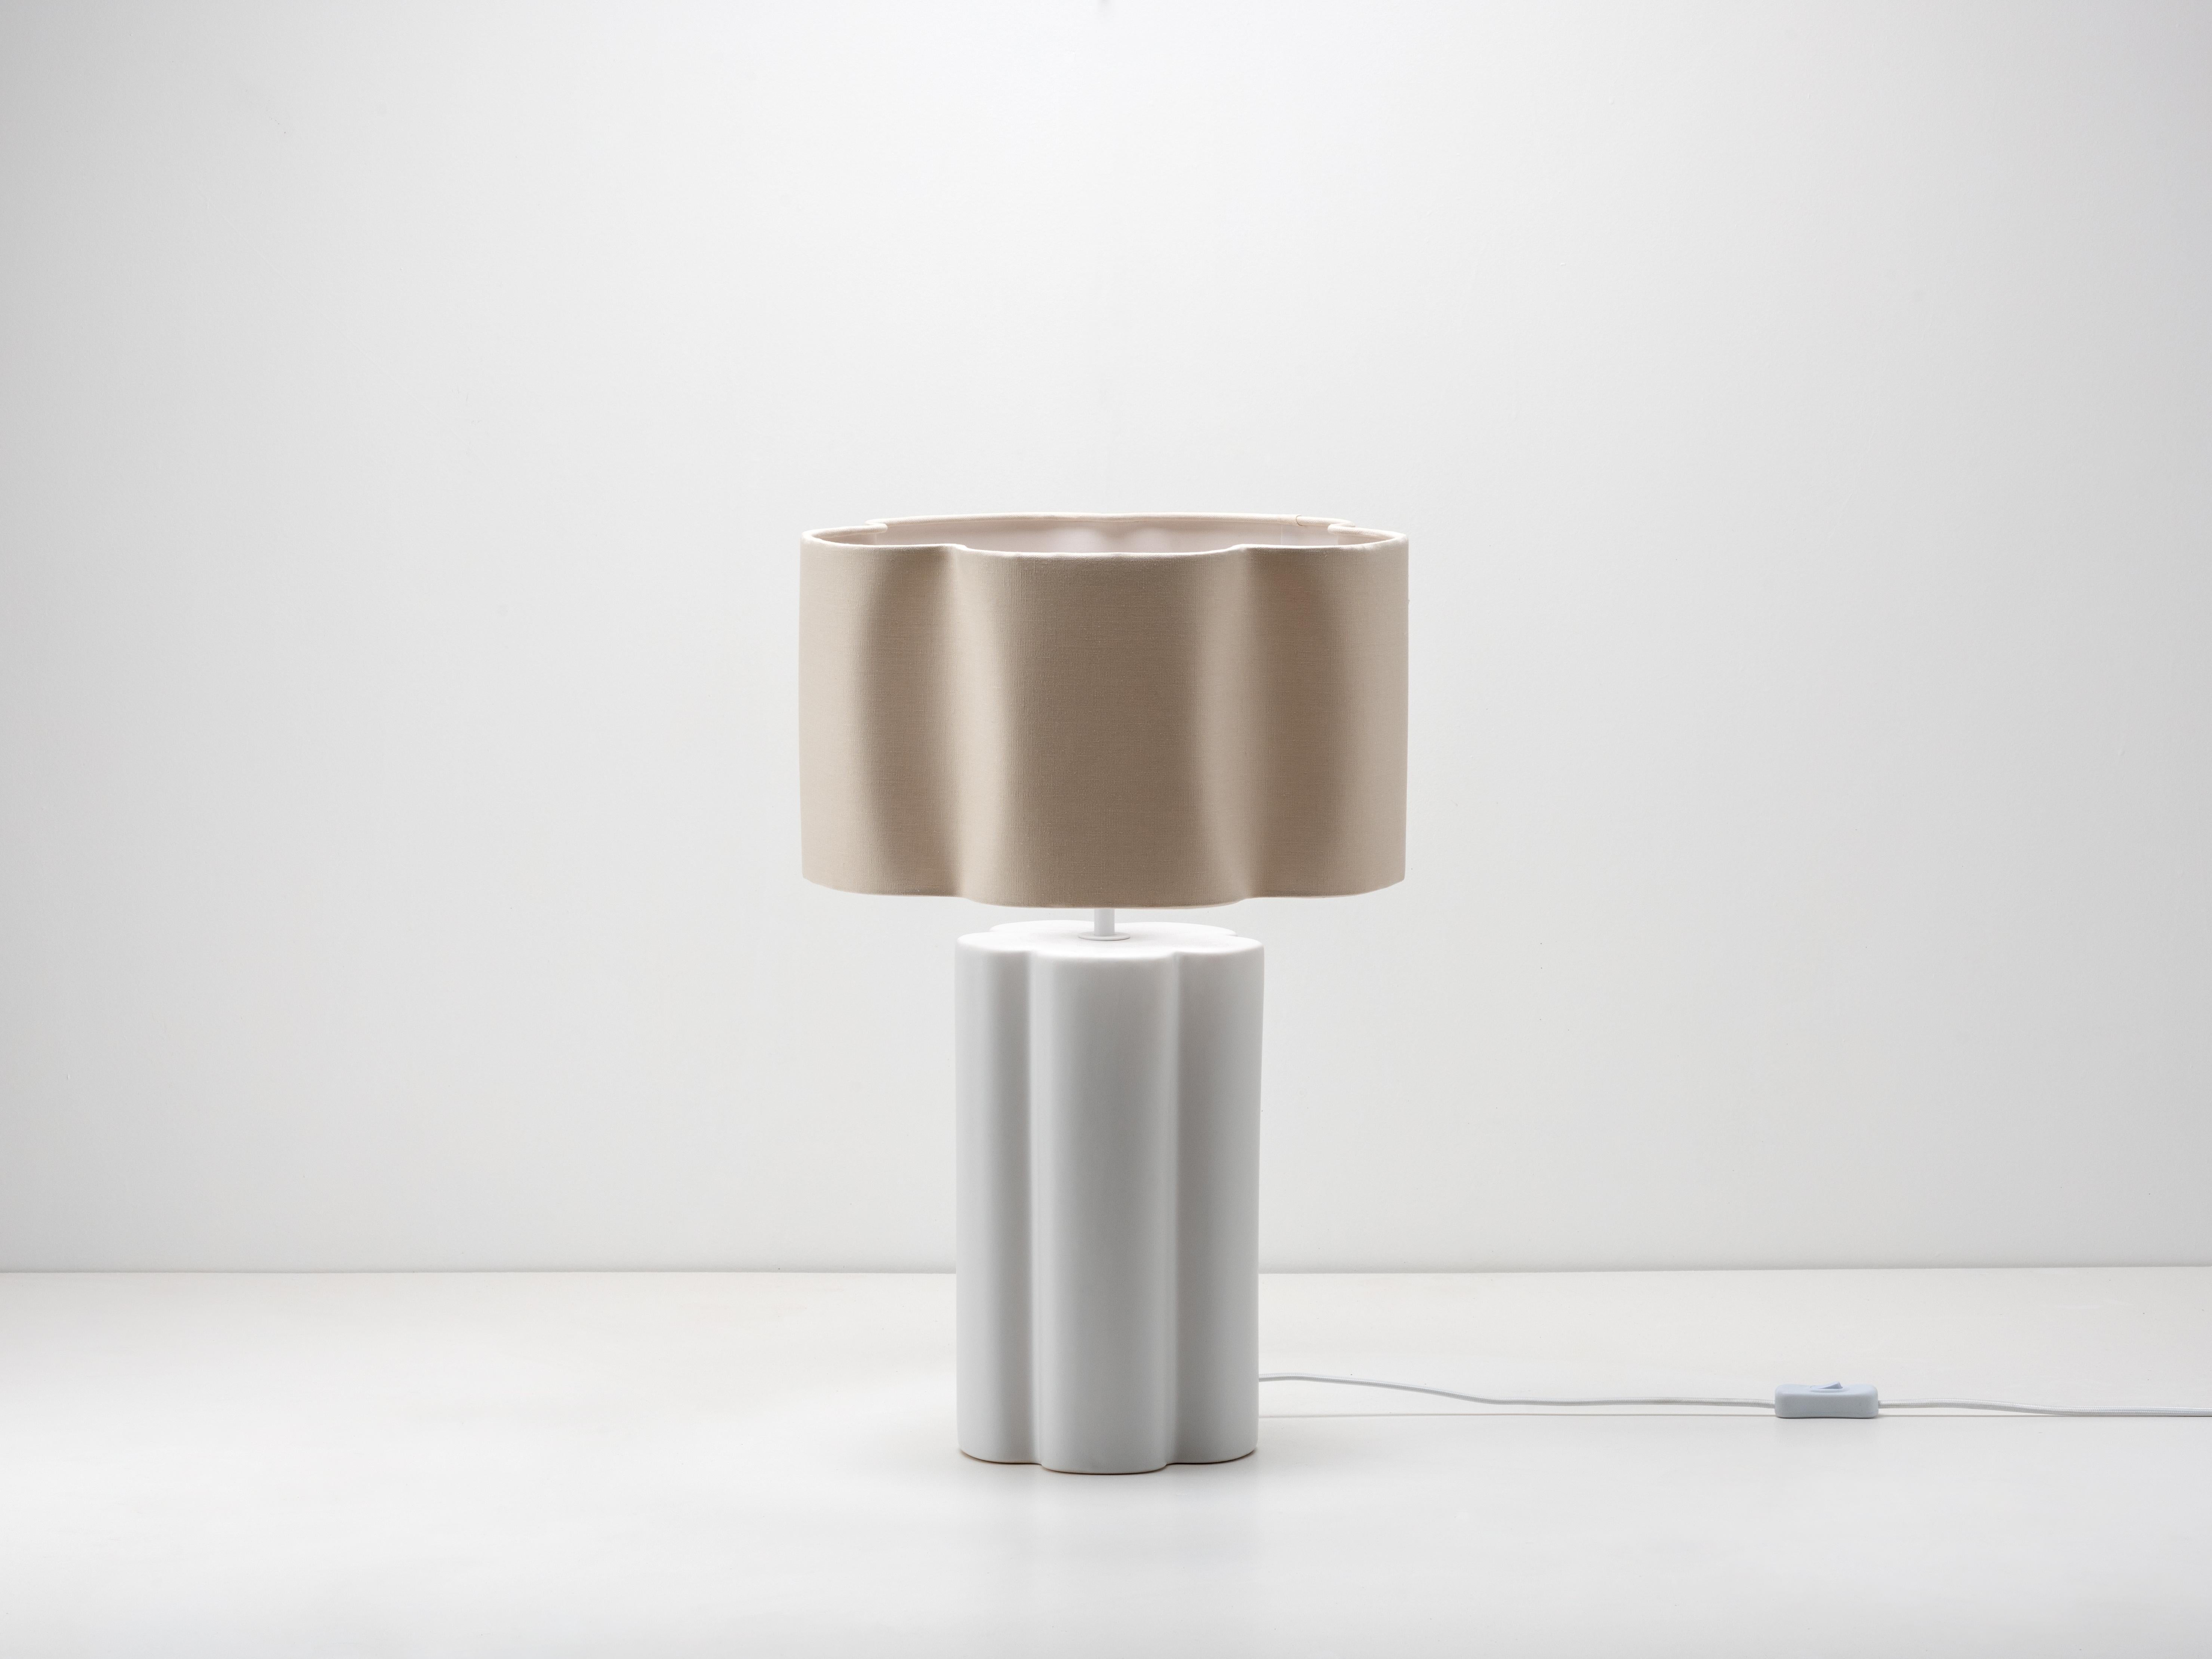 Soften your interior with the natural elements of ceramic and linen. The sculptural ceramic base complements the flower-shaped linen shade. Standing tall at 54cm, this table lamp will make a statement on a sideboard or create warmth in a hallway or